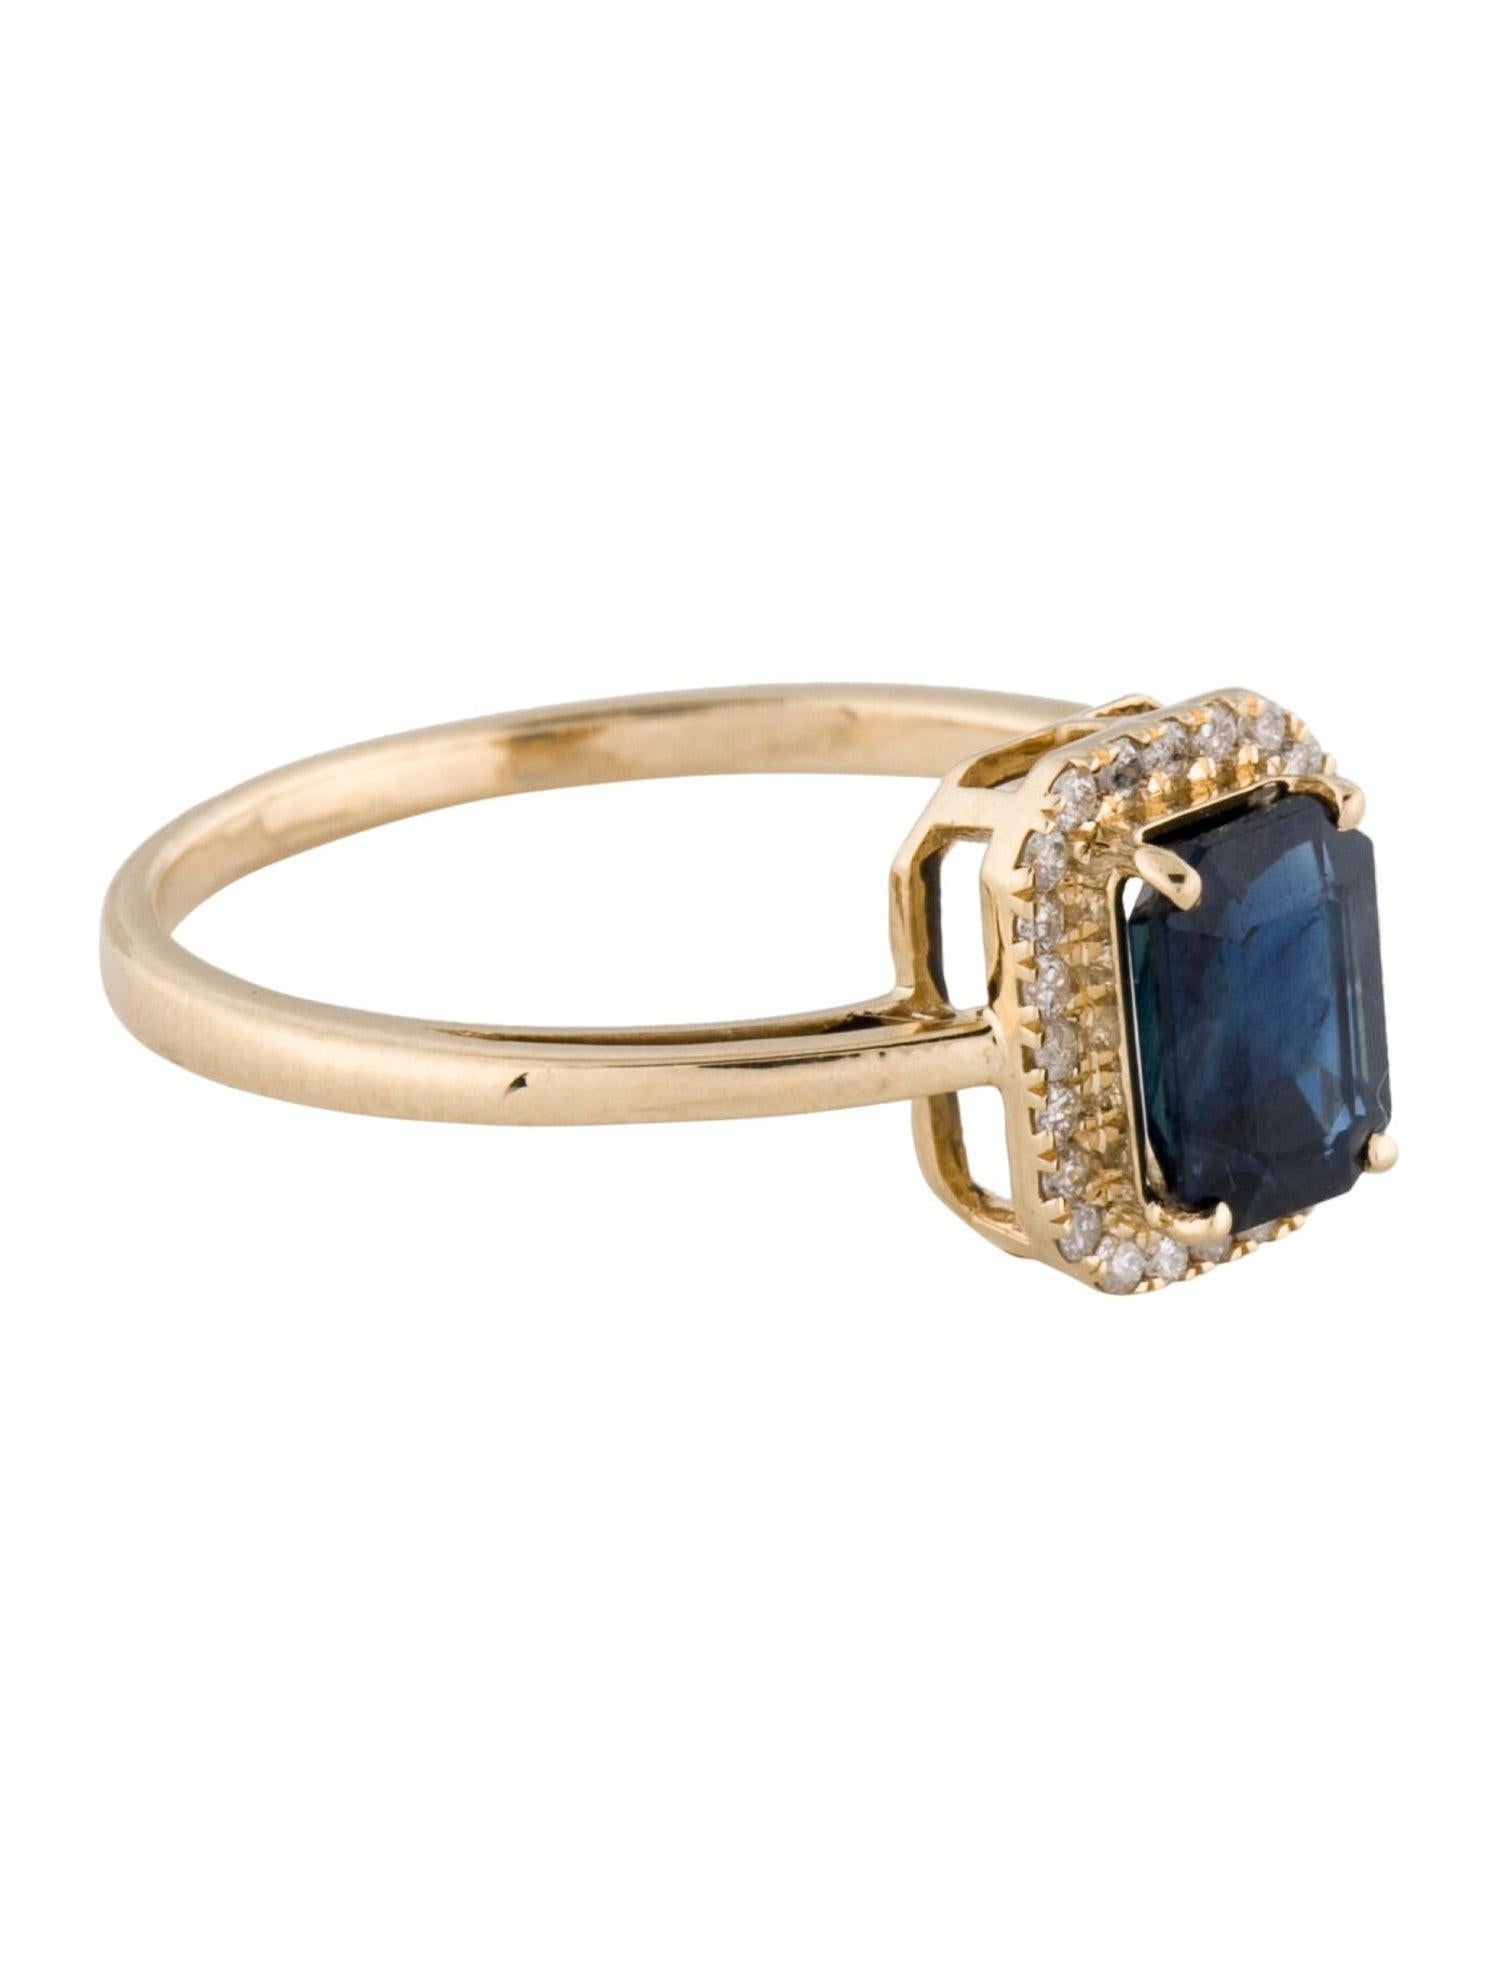 Discover timeless elegance with our stunning 14K Yellow Gold Cocktail Ring, a true masterpiece of fine jewelry design. Sized at 6.75, this exquisite piece features a centerpiece of a 0.98 carat Emerald Cut Sapphire, radiating a deep blue hue that